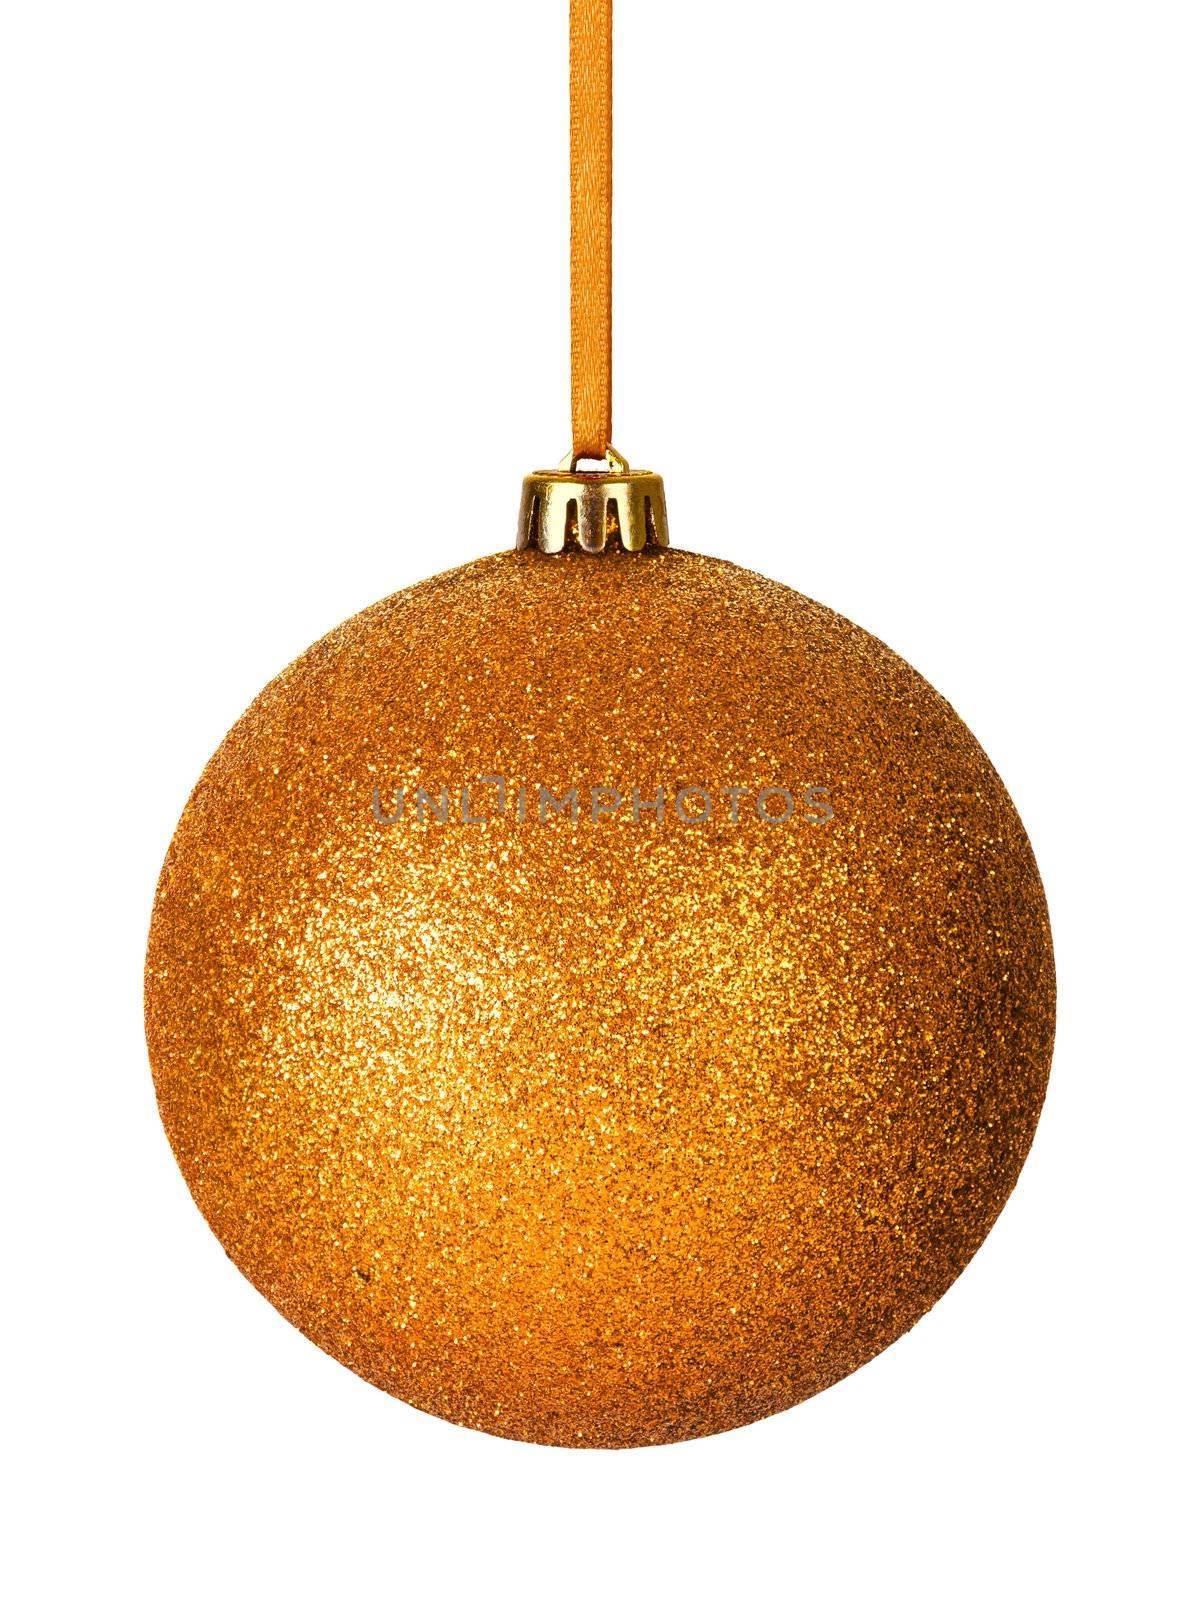 Gold christmas bauble with ribbon isolated on white background